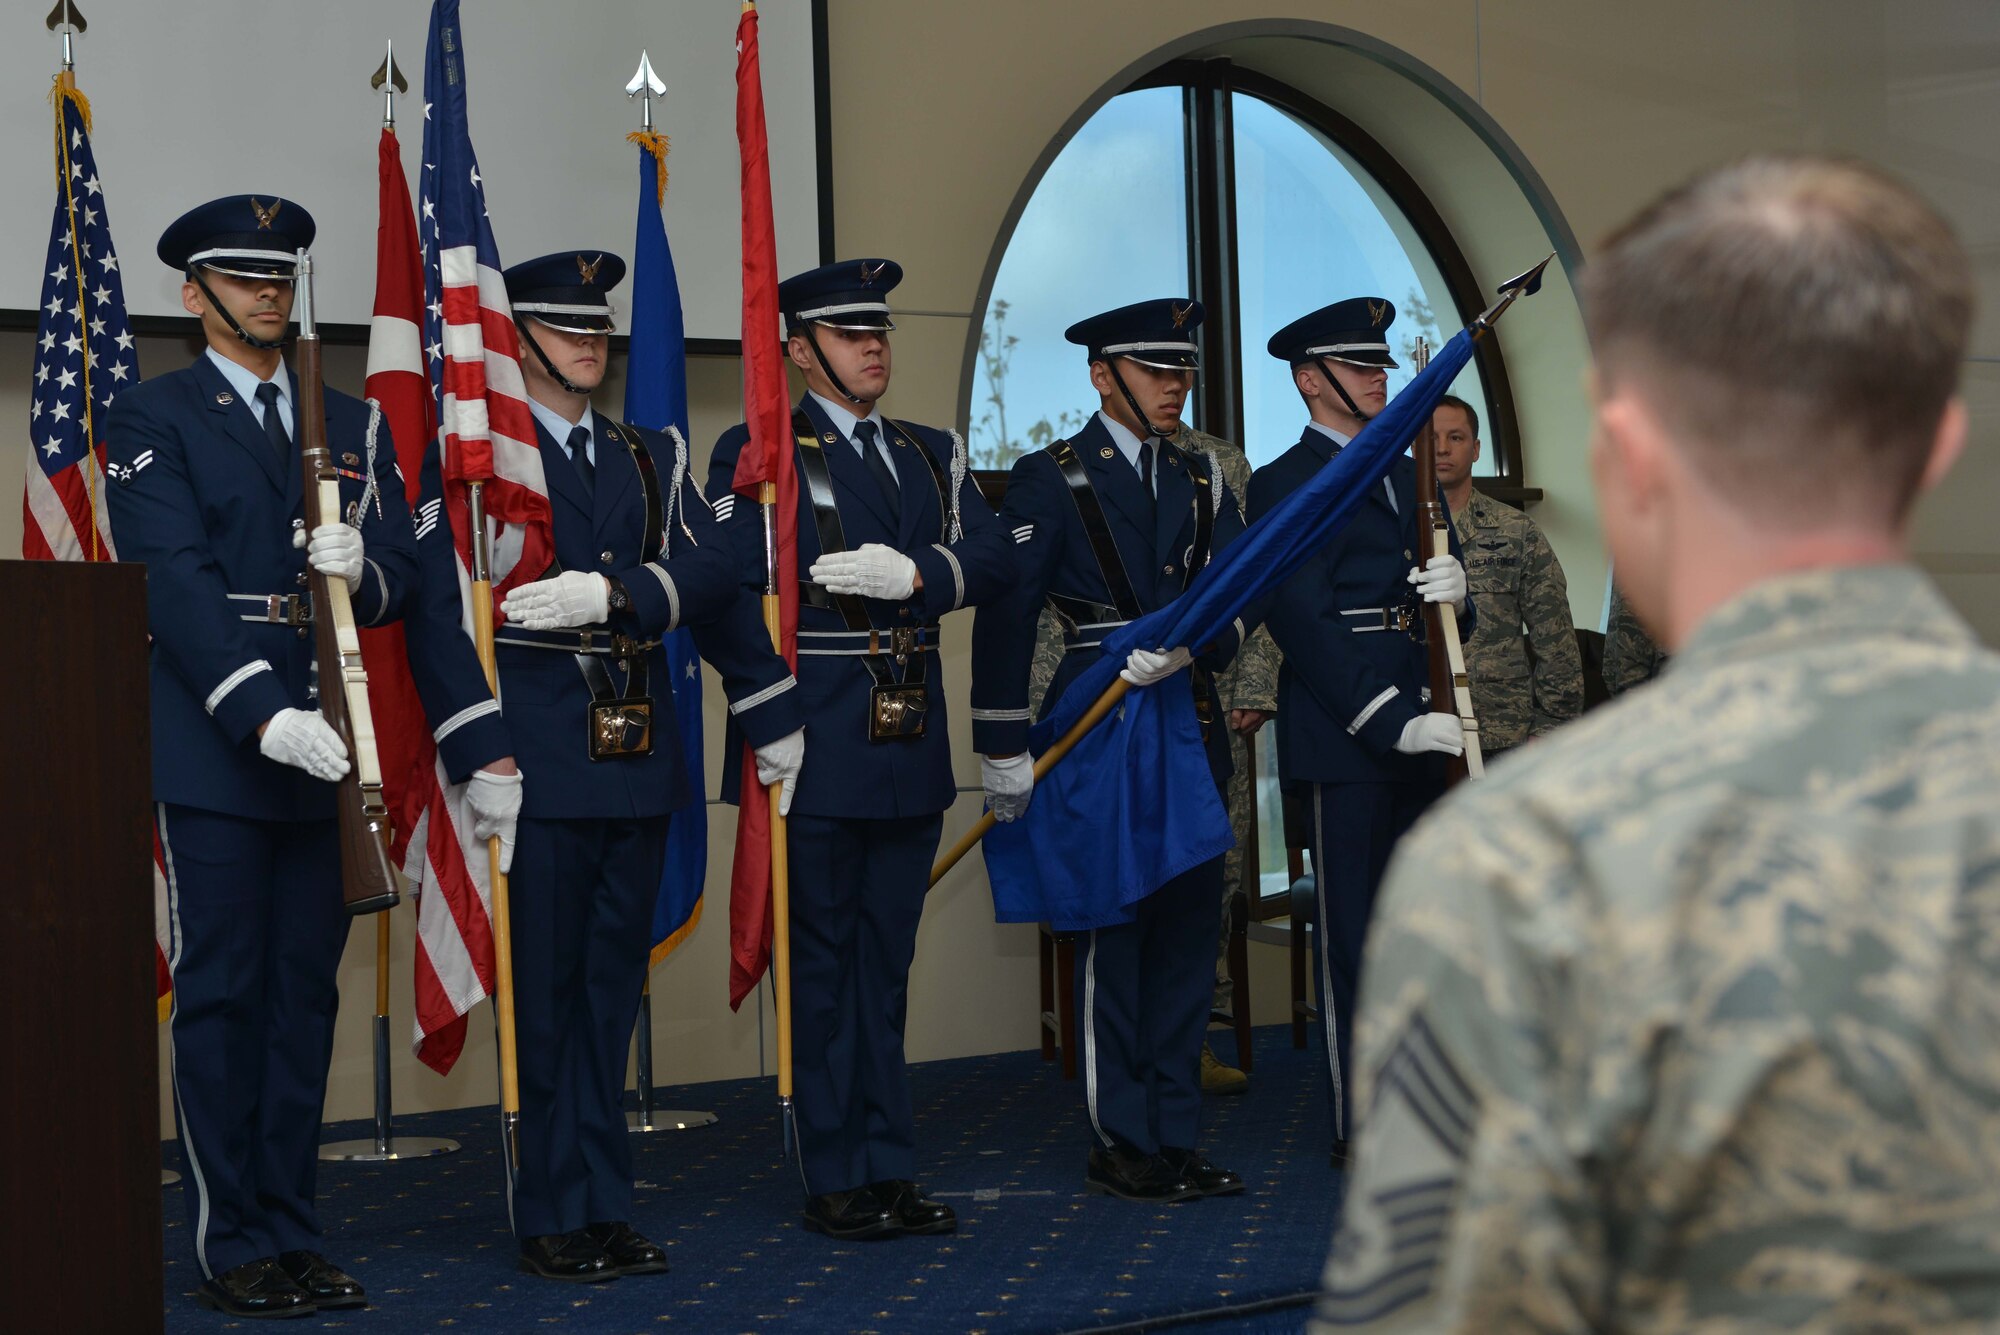 Airmen from the Incirlik Air Base honor guard present the colors during a change of command ceremony June 16, 2016, at Incirlik AB, Turkey. A change of command ceremony is a tradition that represents a formal transfer of authority and responsibility from the outgoing commander to the incoming commander. (U.S. Air Force photo by Senior Airman John Nieves Camacho/Released)